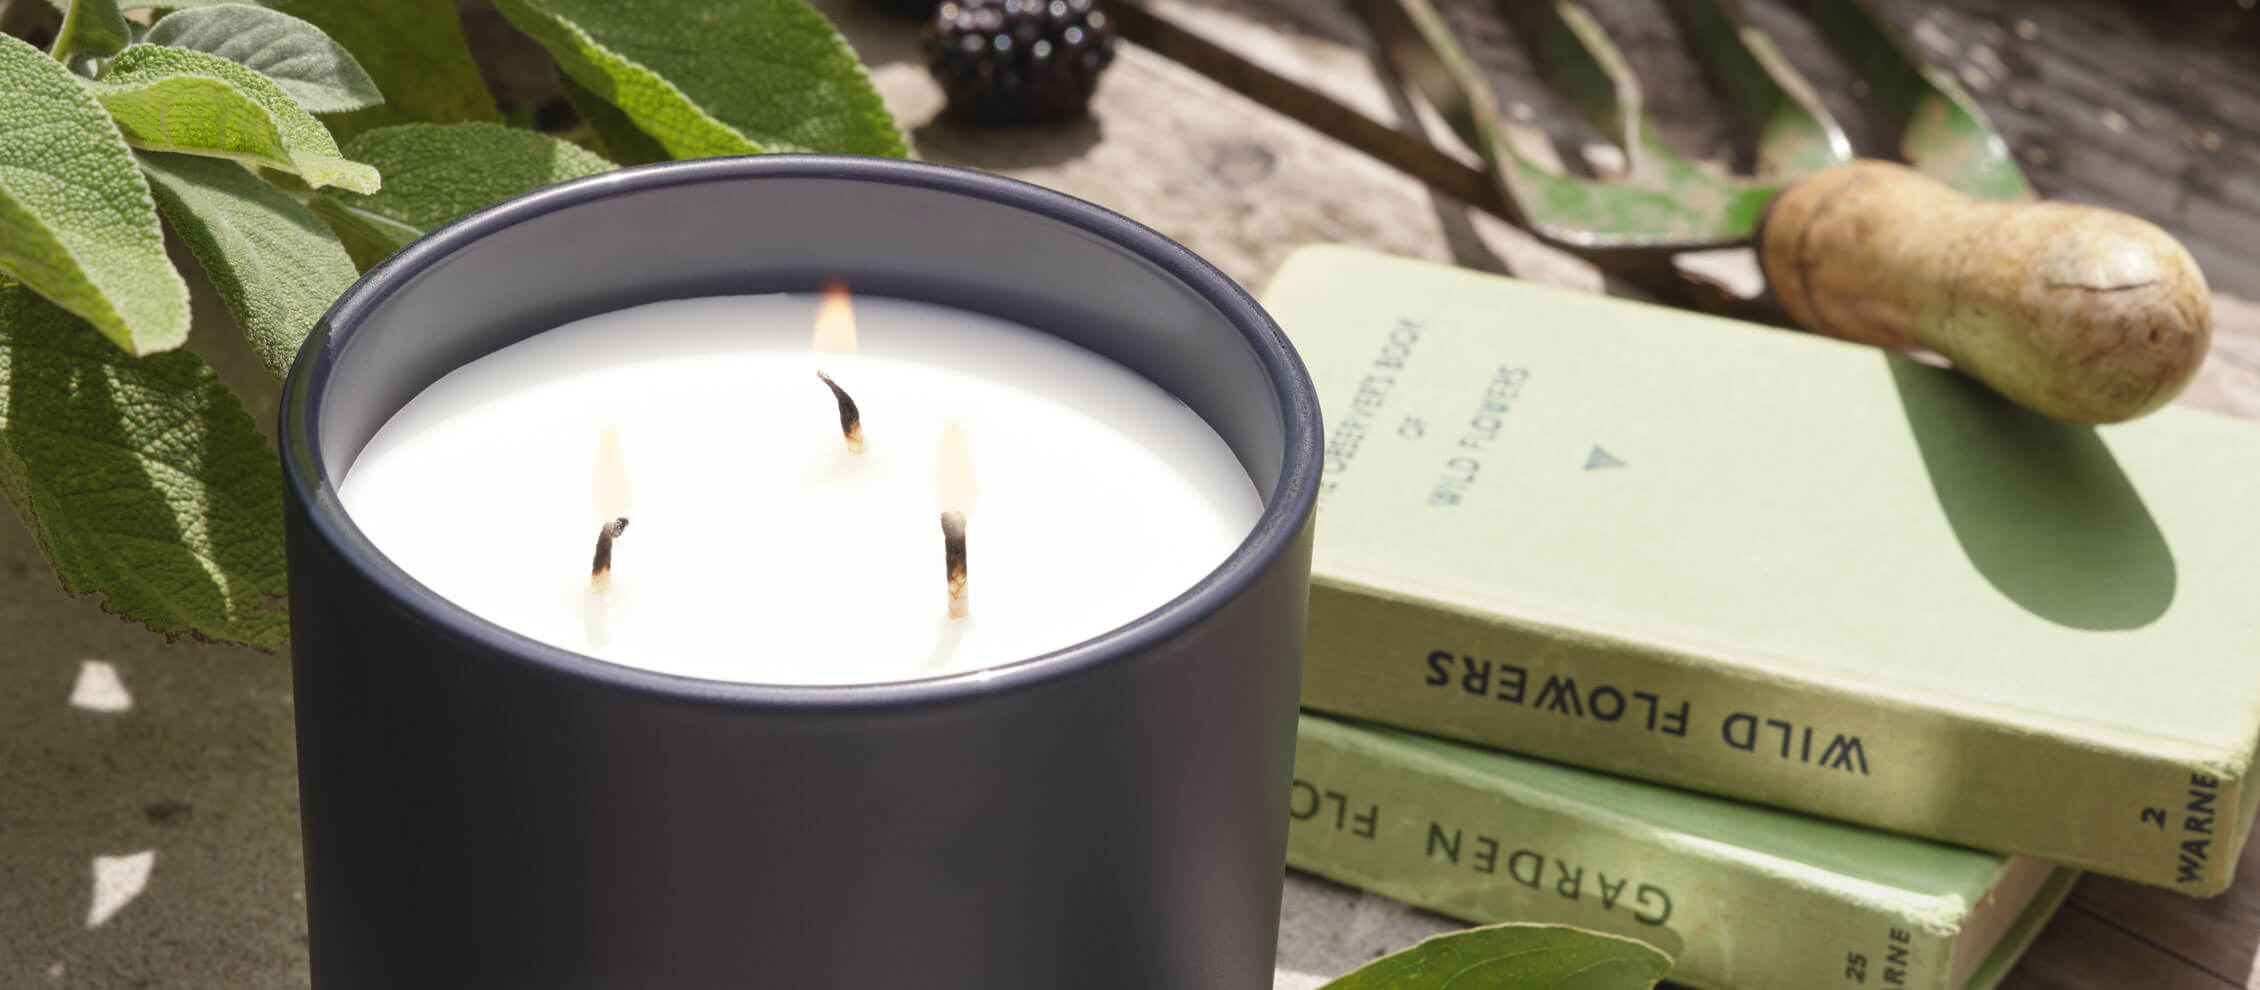 Rubus scented candle